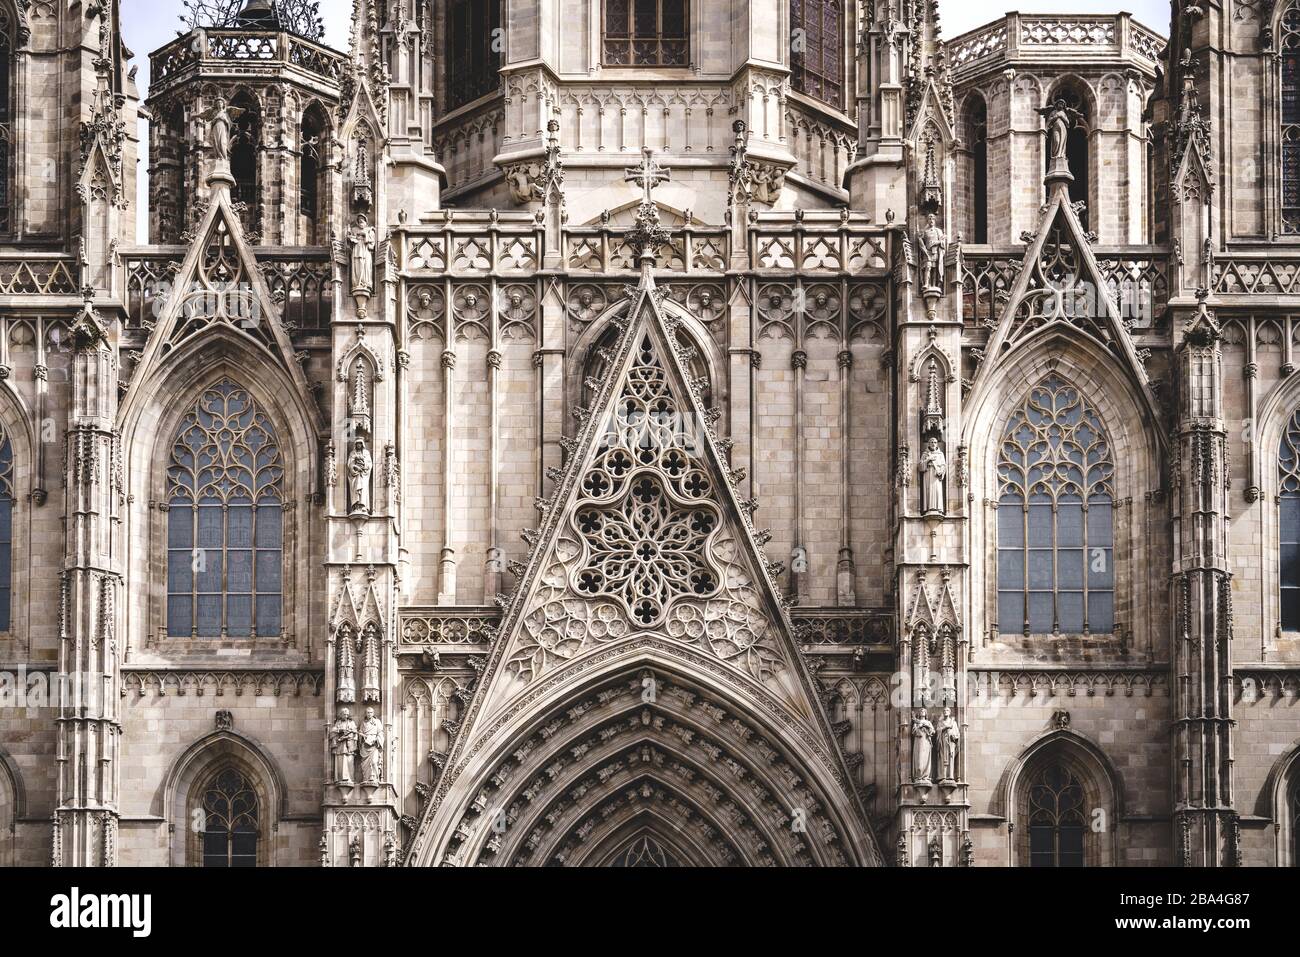 Rose window and sculpted filigrees at the front of a gothic cathedral Stock Photo